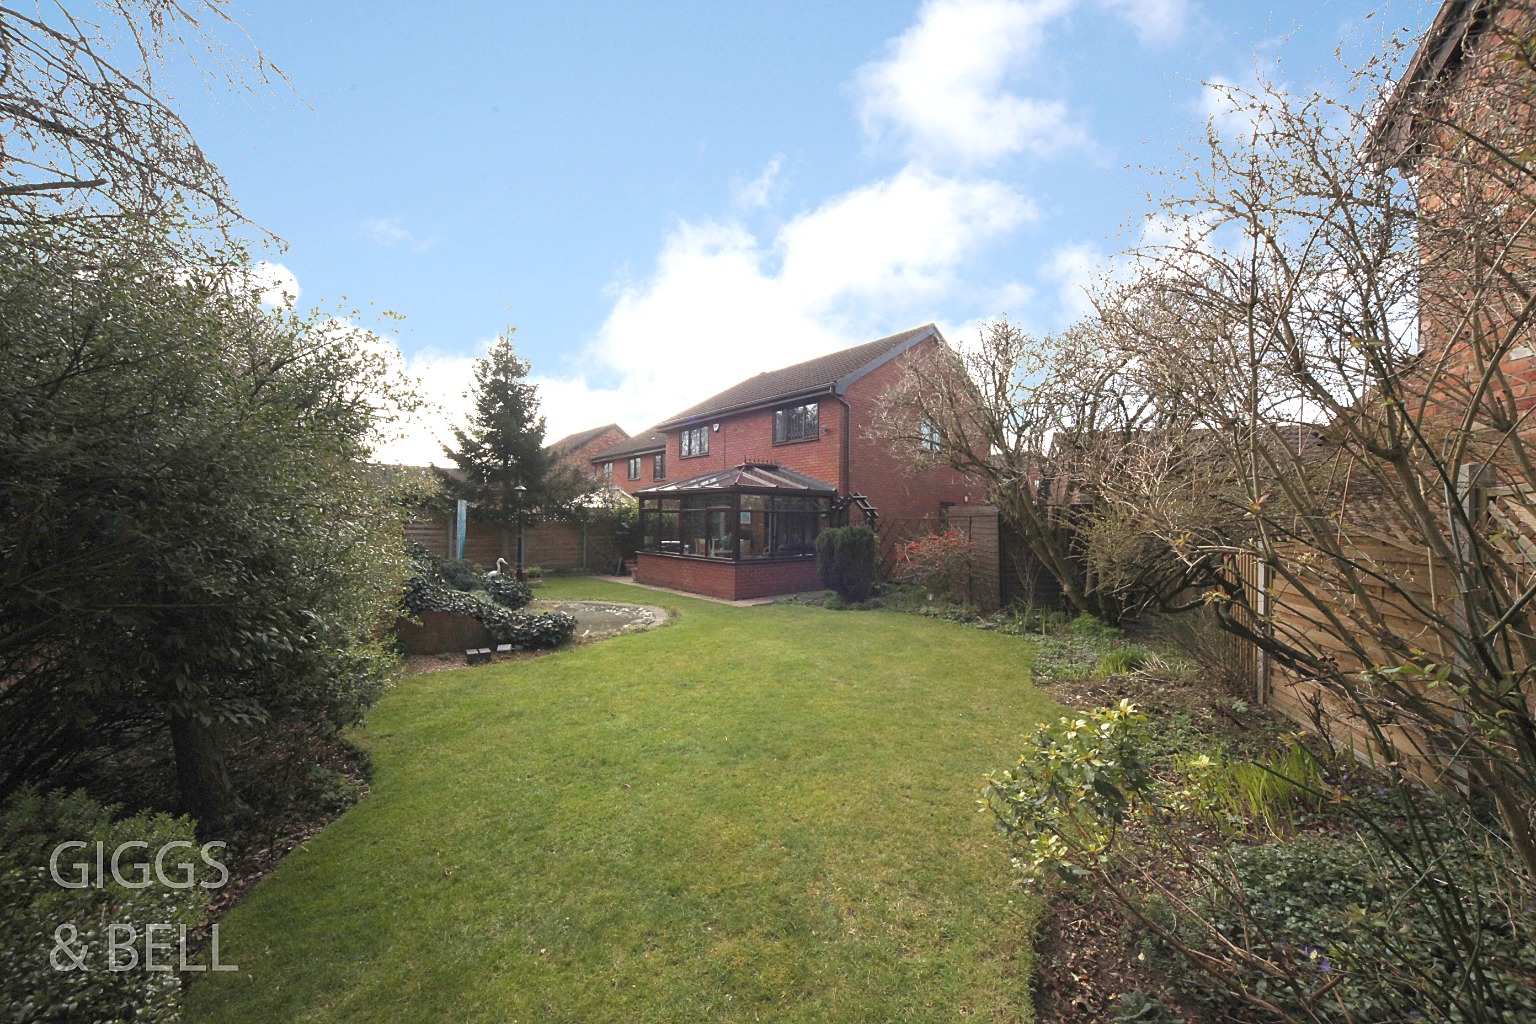 4 bed detached house for sale in Copthorne, Luton 25